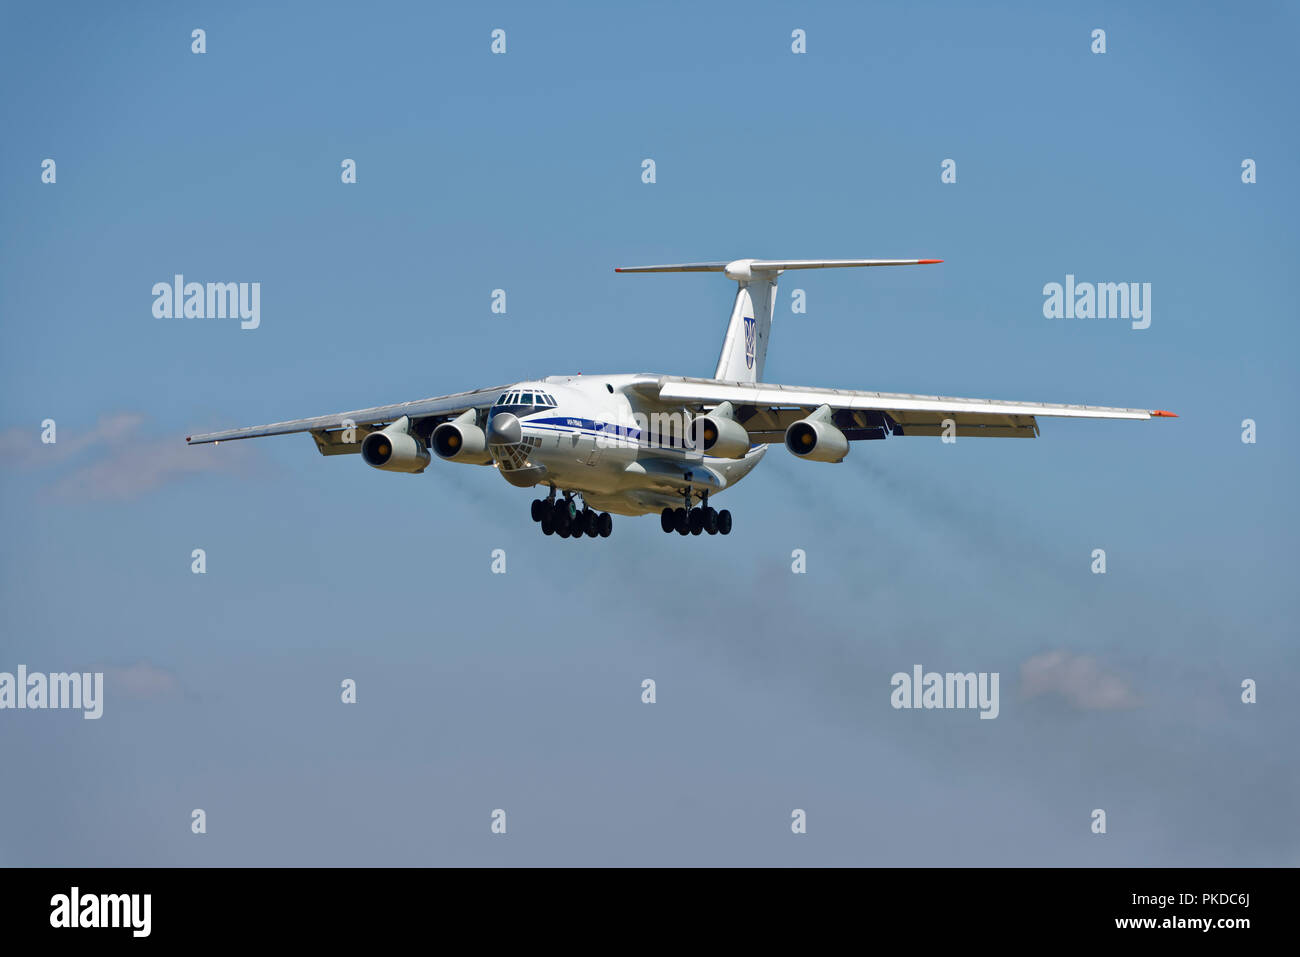 Ukrainian Air Force Ilyushin Il-76 Four Engine Air Freighter Aircraft on final approach to land at RAF Fairford to participate in the RIAT Air Show Stock Photo